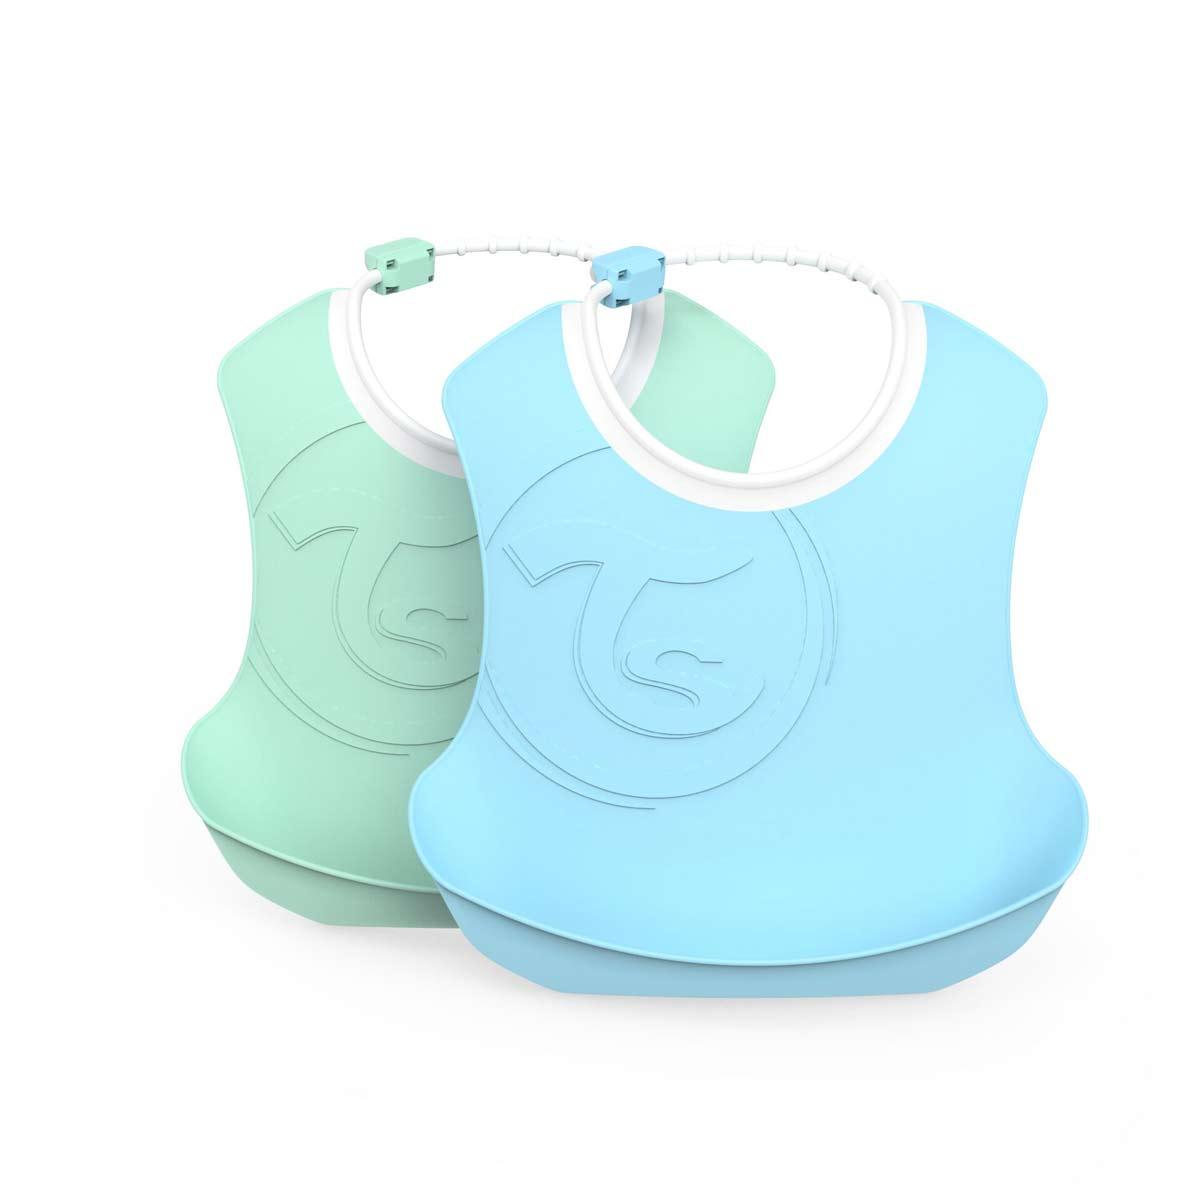 Bibs 4+ months, blue and green - MoonyBoon